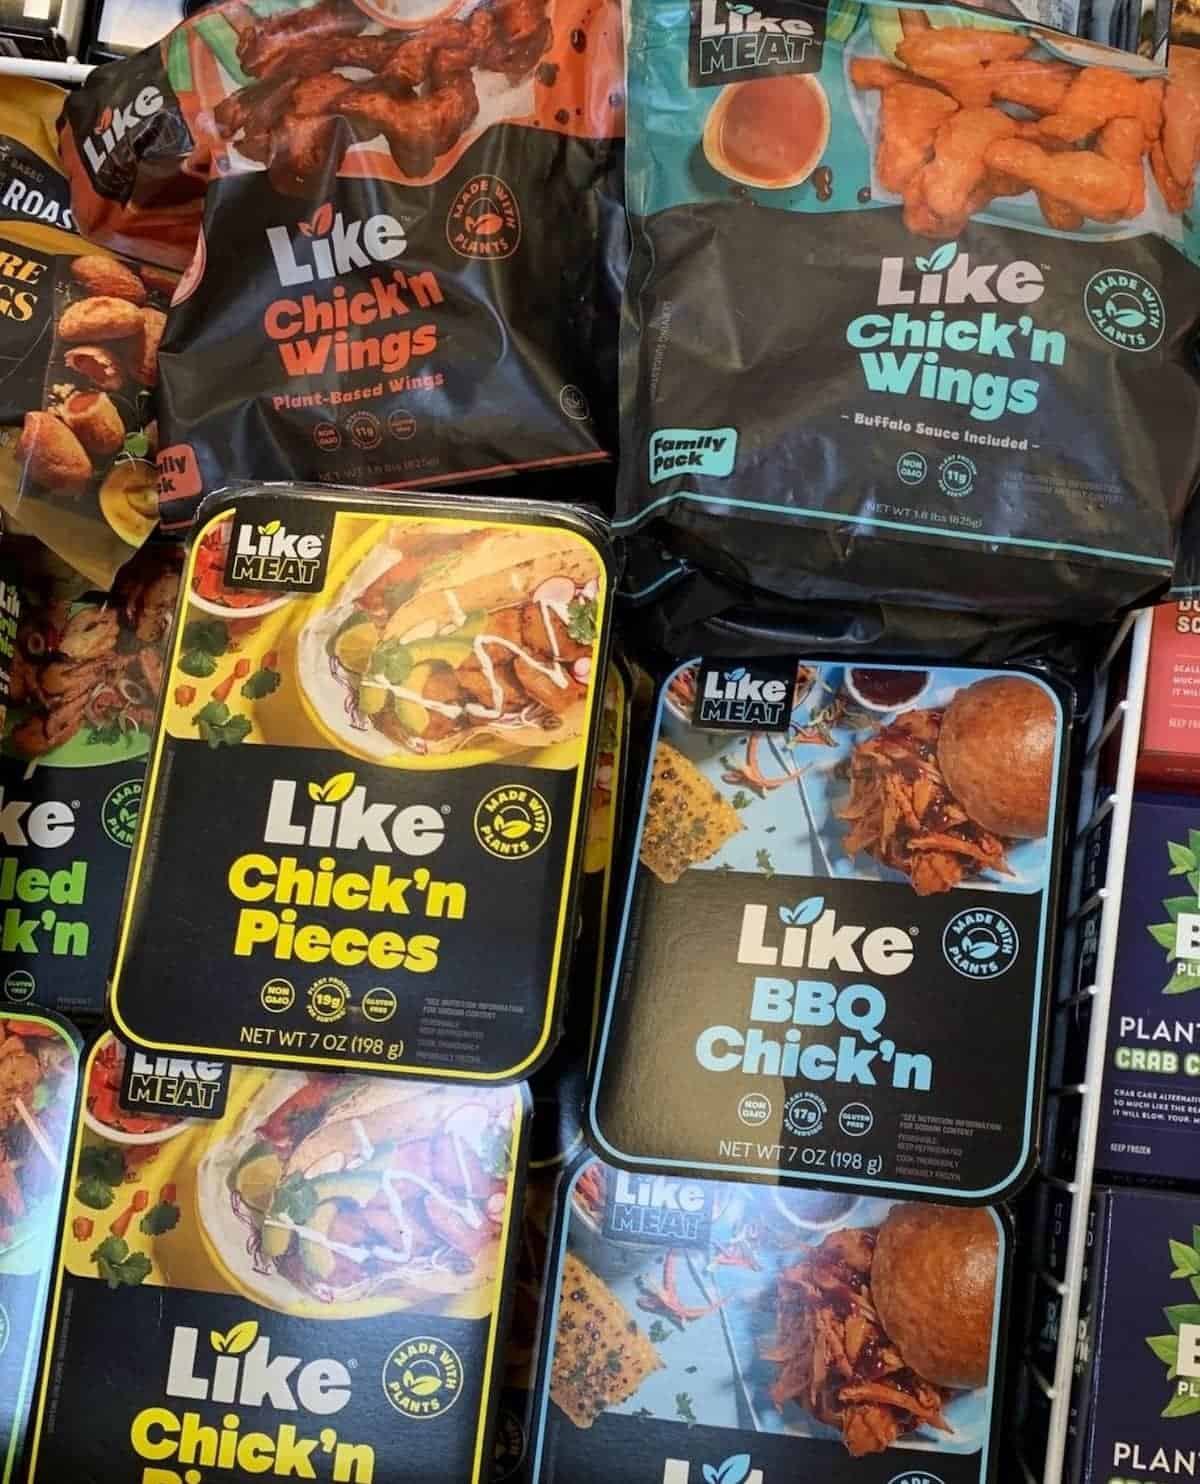 Packages of Like Meat brand plant-based chicken.